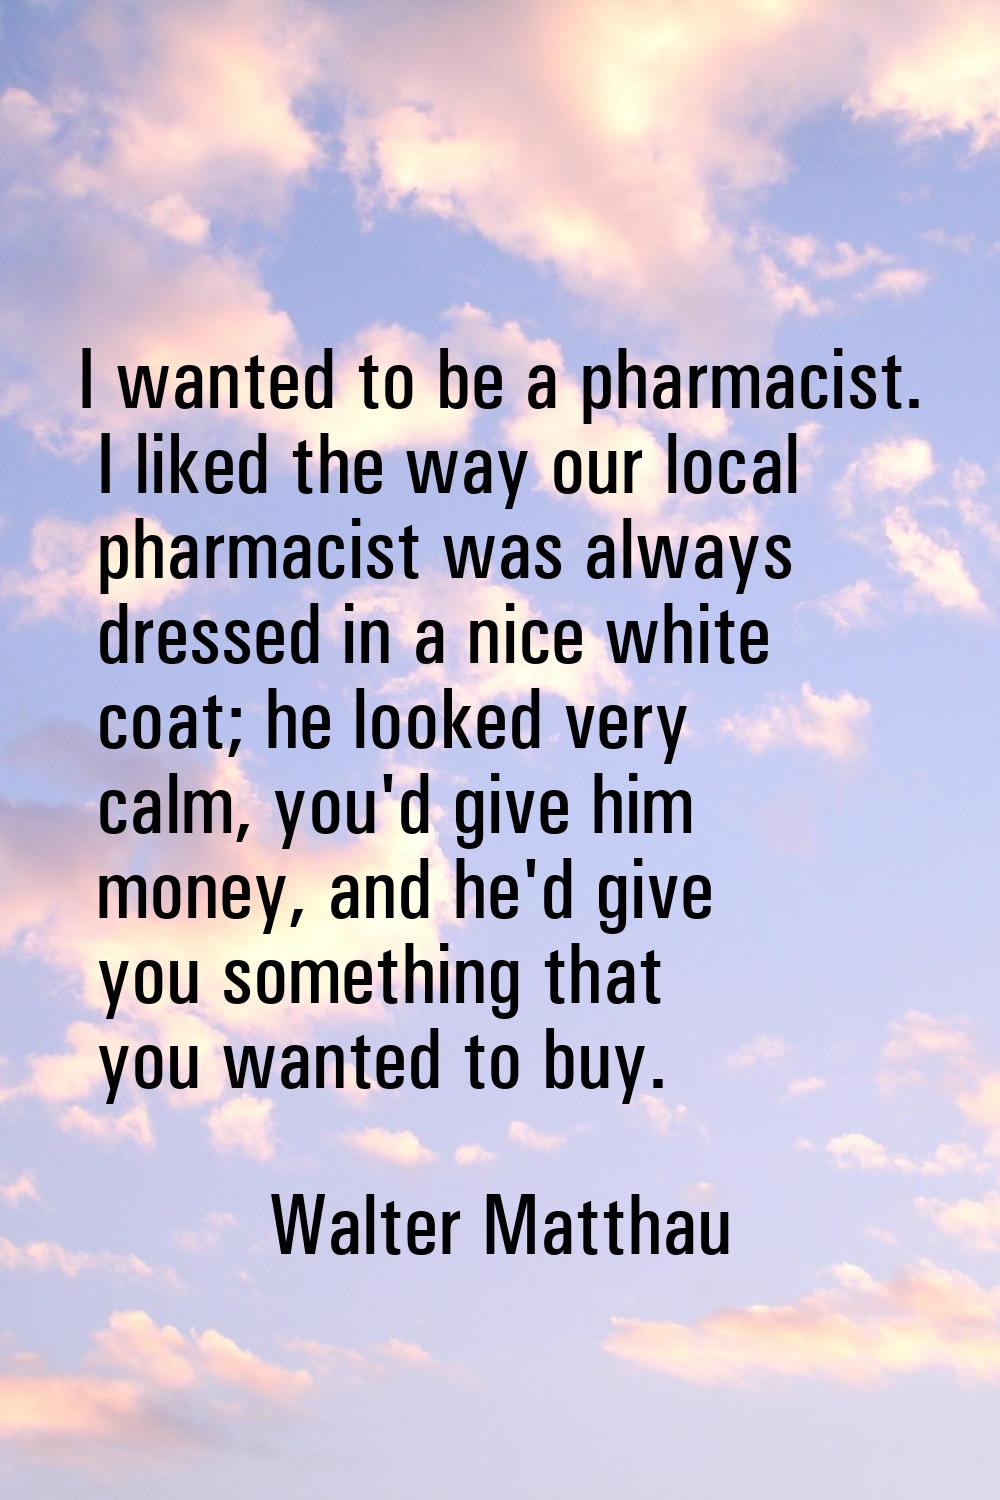 I wanted to be a pharmacist. I liked the way our local pharmacist was always dressed in a nice whit